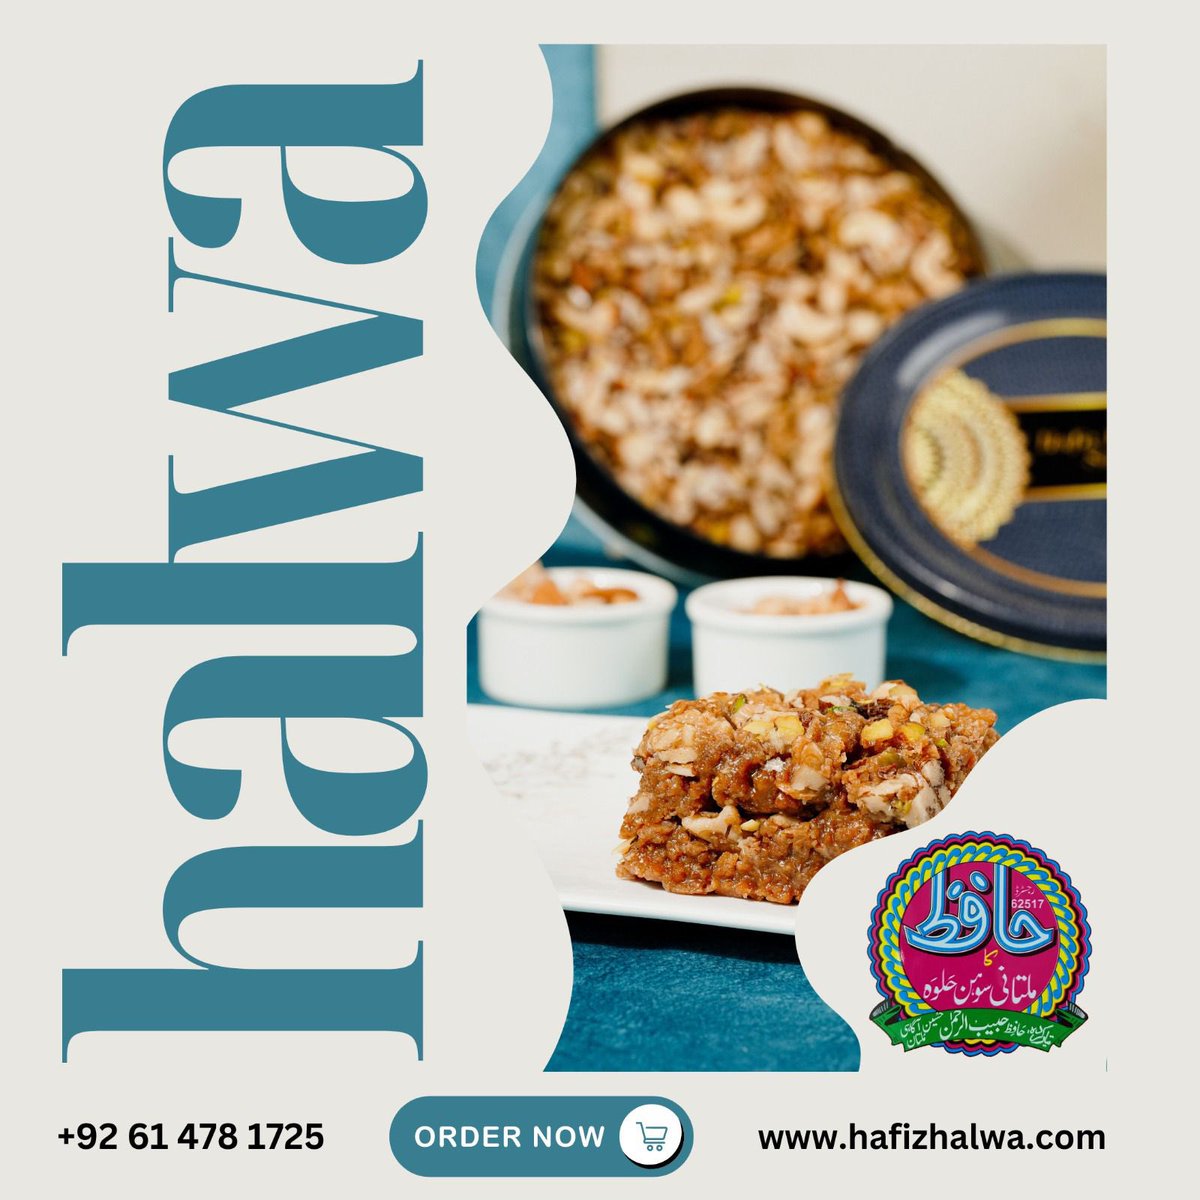 Special Mix Dry Fruit Halwa (1Kg*) | Rs.1,900.00

#SohanHalwa #dryfruits #cashondelivery #pakistanifood #multanisohanhalwa #pistachios #walnuts #almonds

Our halwa is made using the same traditional recipe that has been passed down for generations.